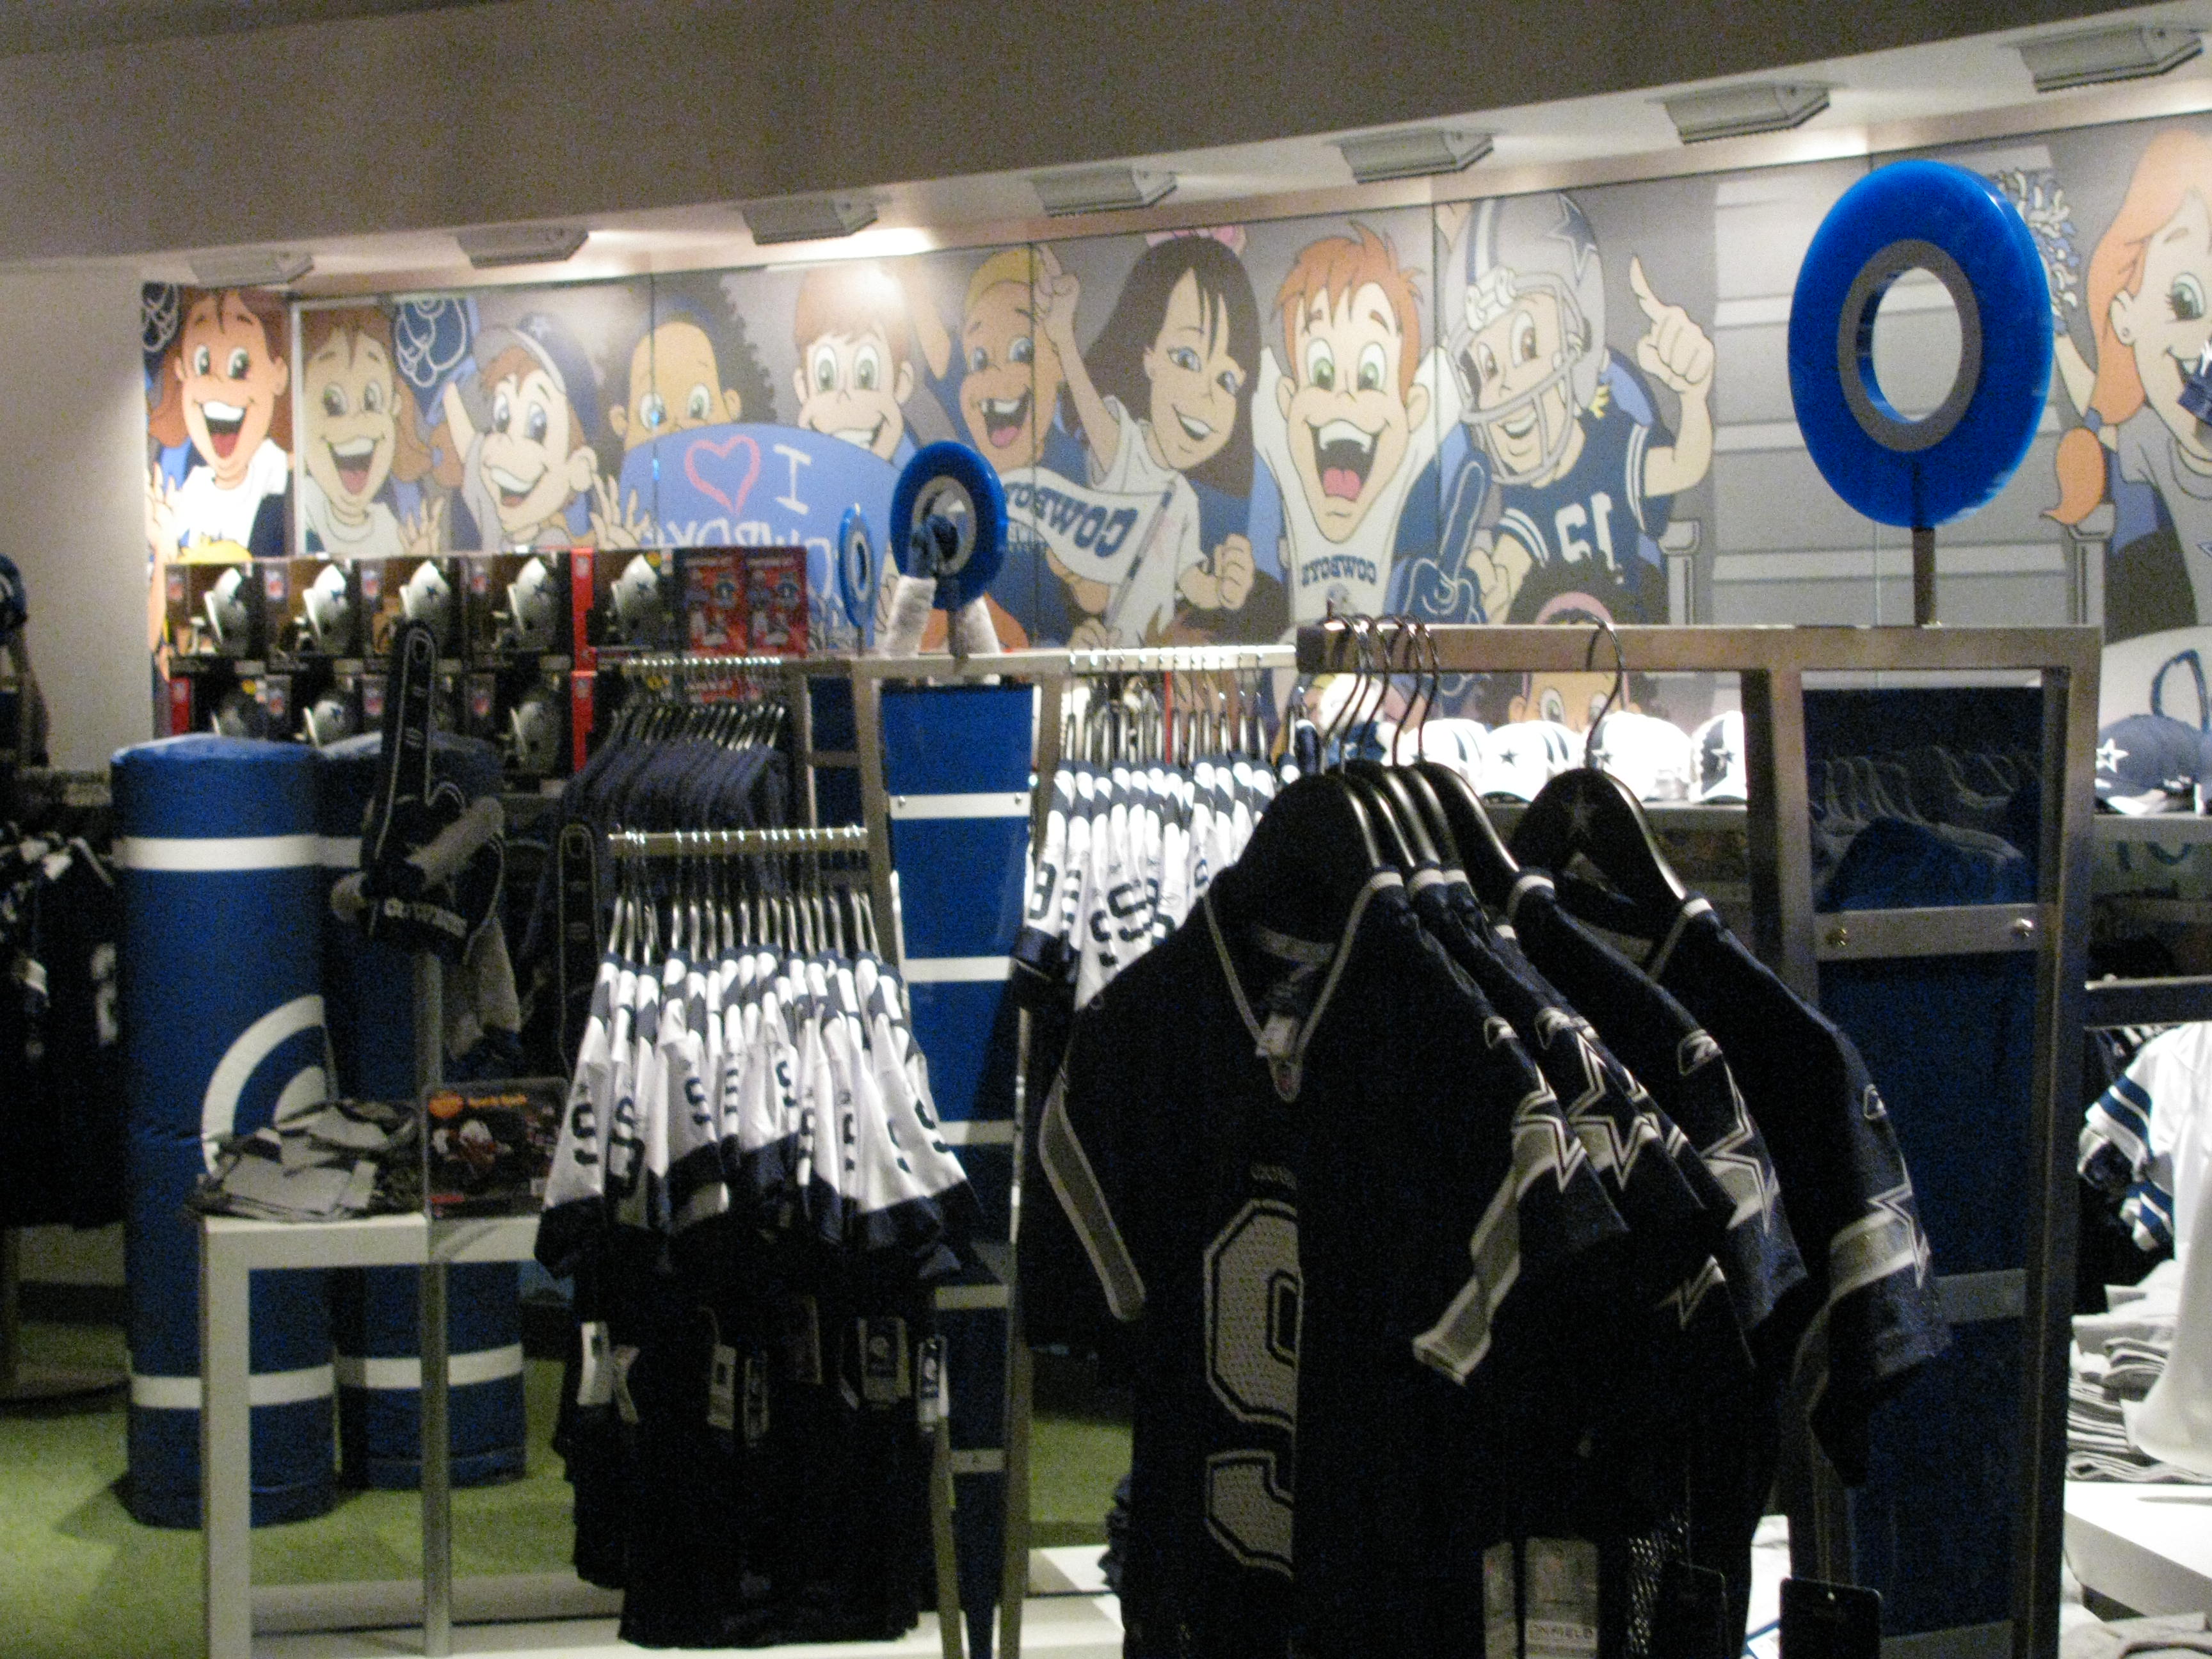 Dallas Cowboys : Sports Fan Shop at Target - Clothing & Accessories